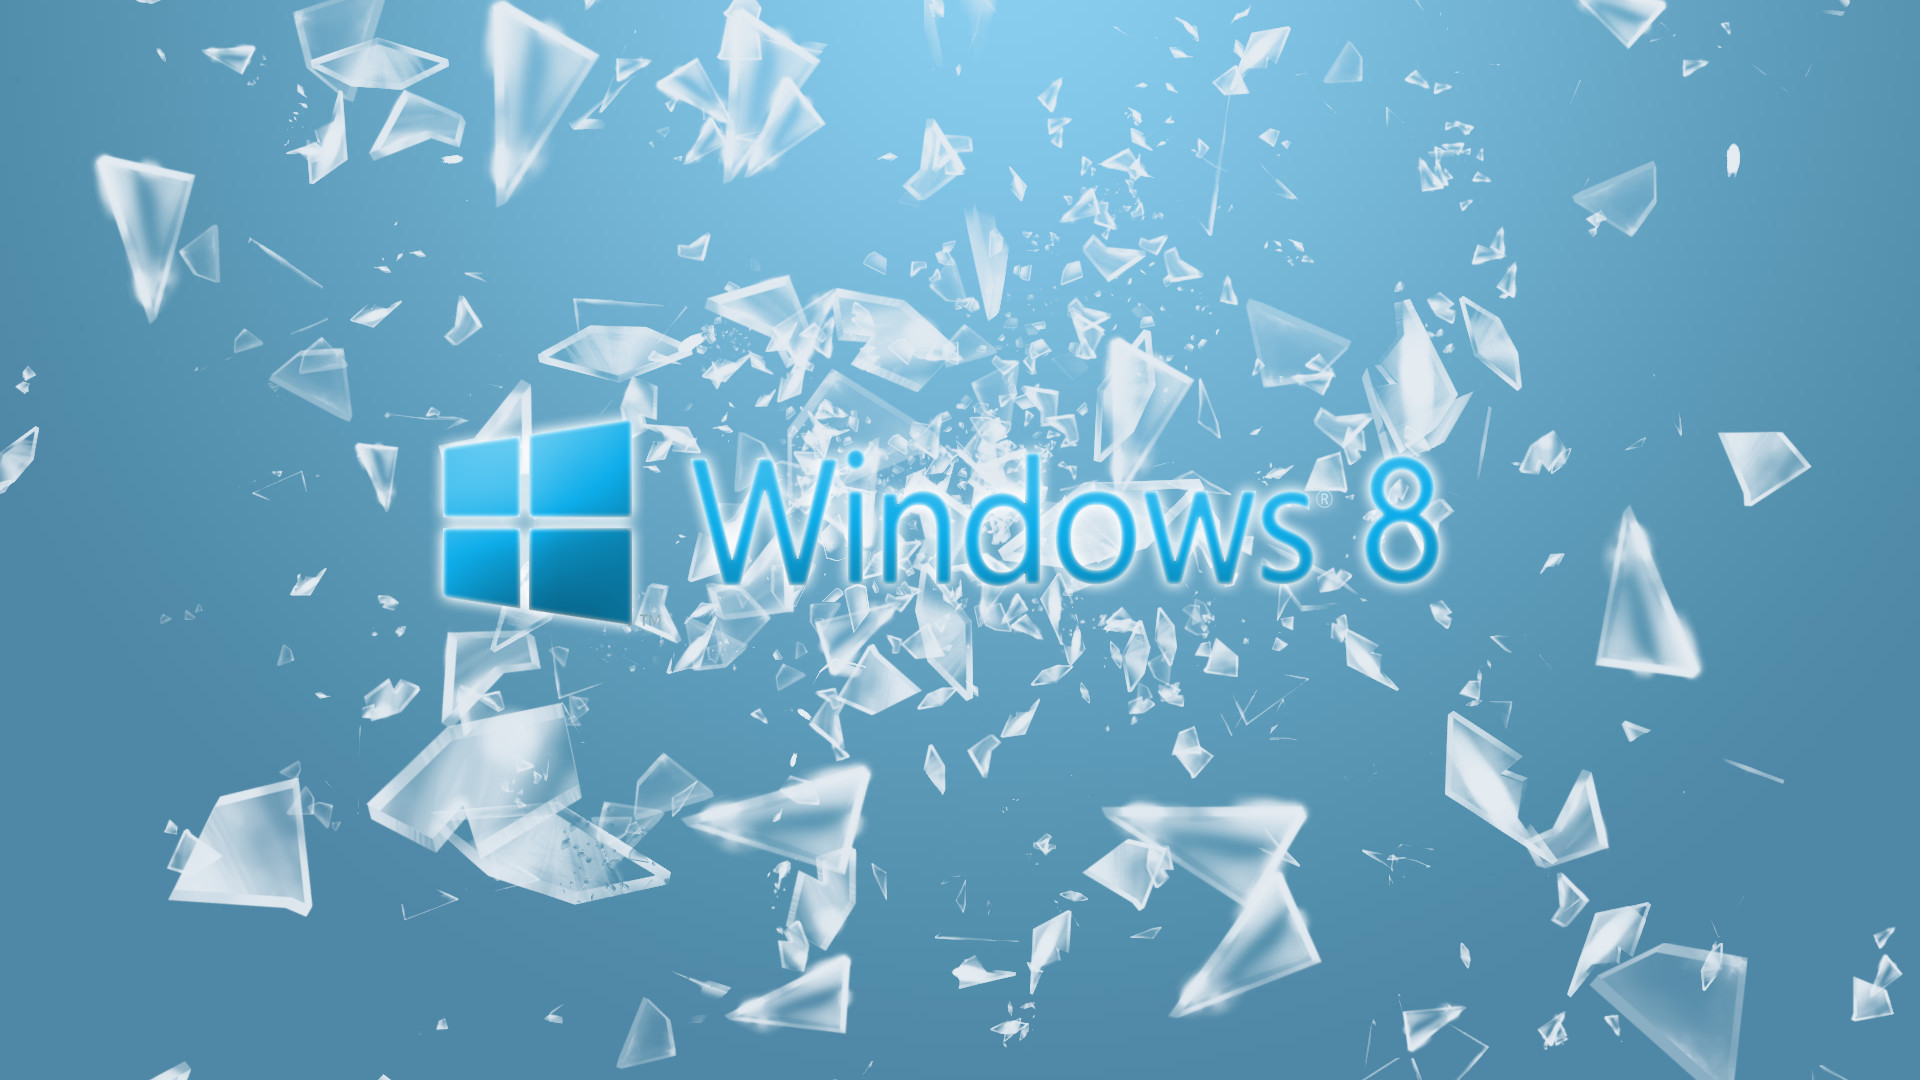 1920x1080 Windows 8 HD Wallpaper Looking for screen savers wallpapers background to  make my new OS pop